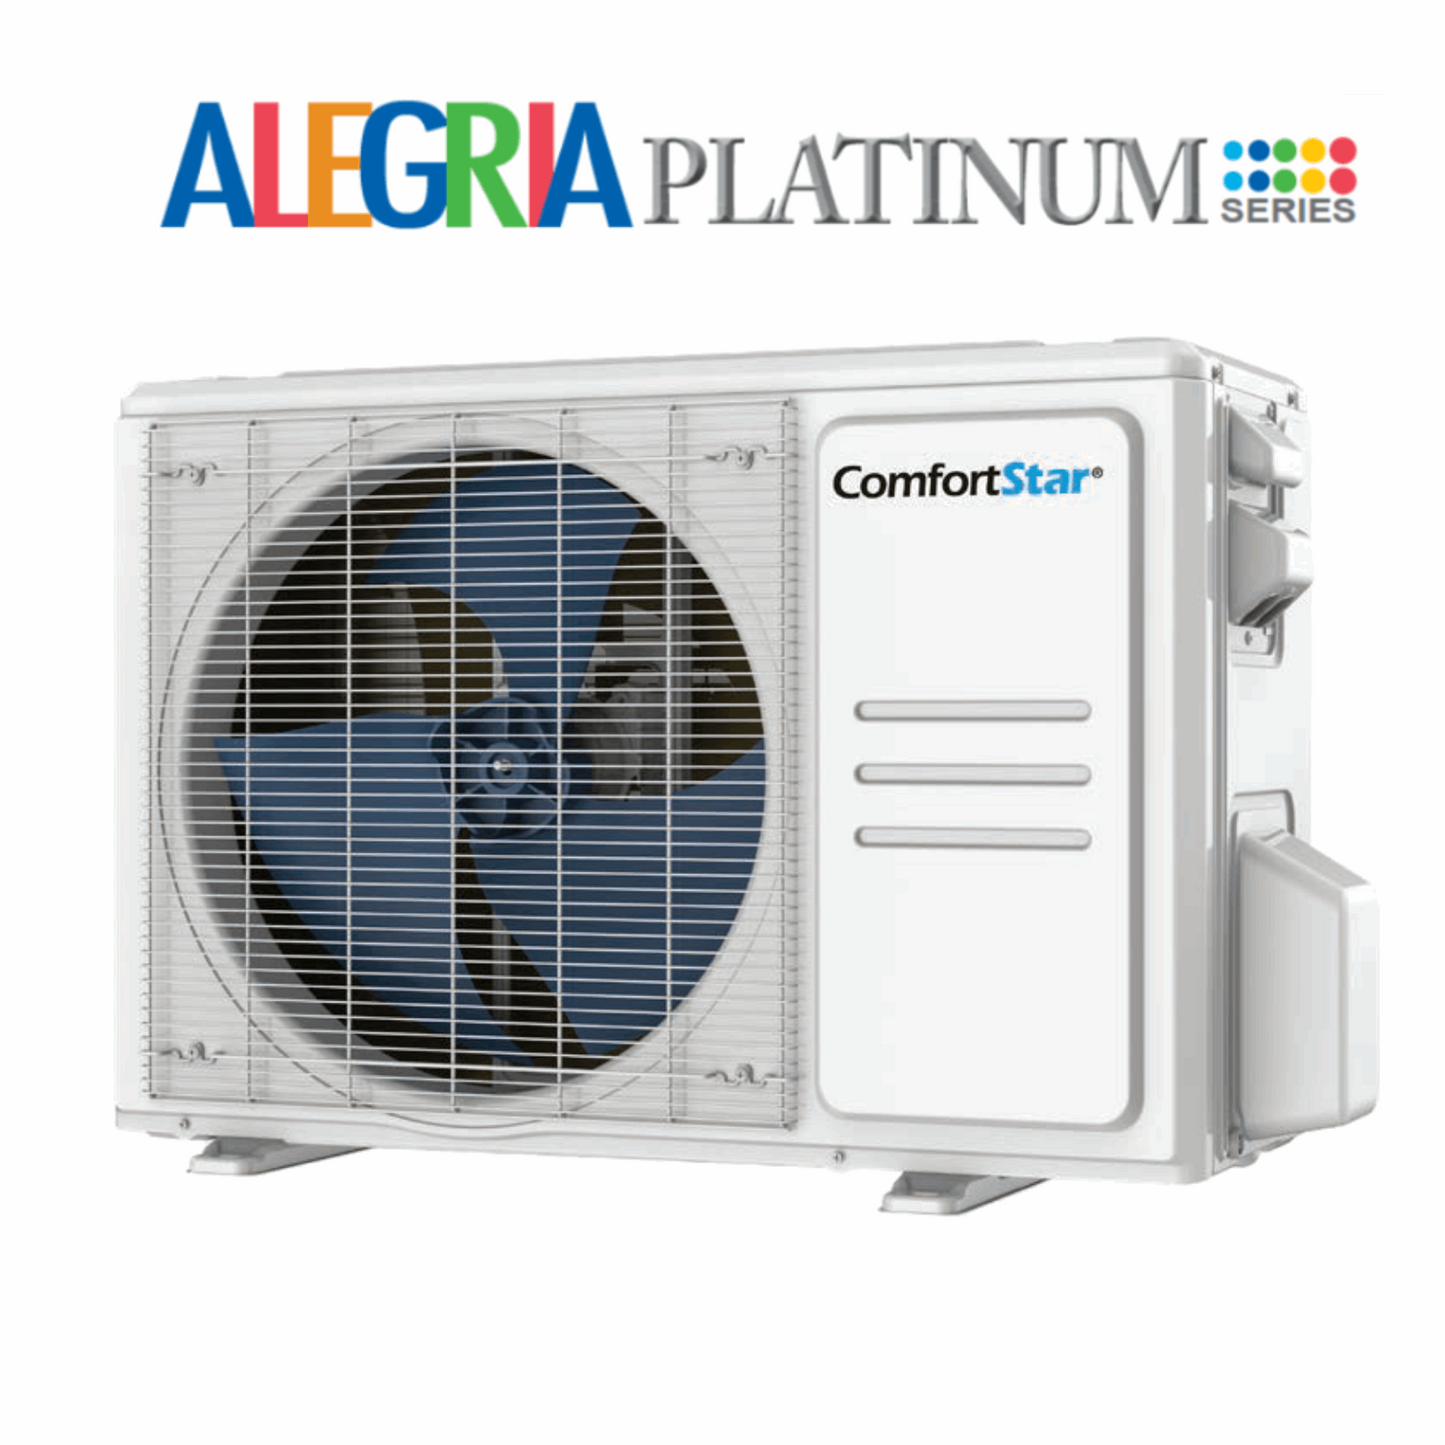 18K DUAL ZONE OUTDOOR CONDENSING UNIT - MIX DUCTLESS AND DUCTED SYSTEM 20.95 SEER2